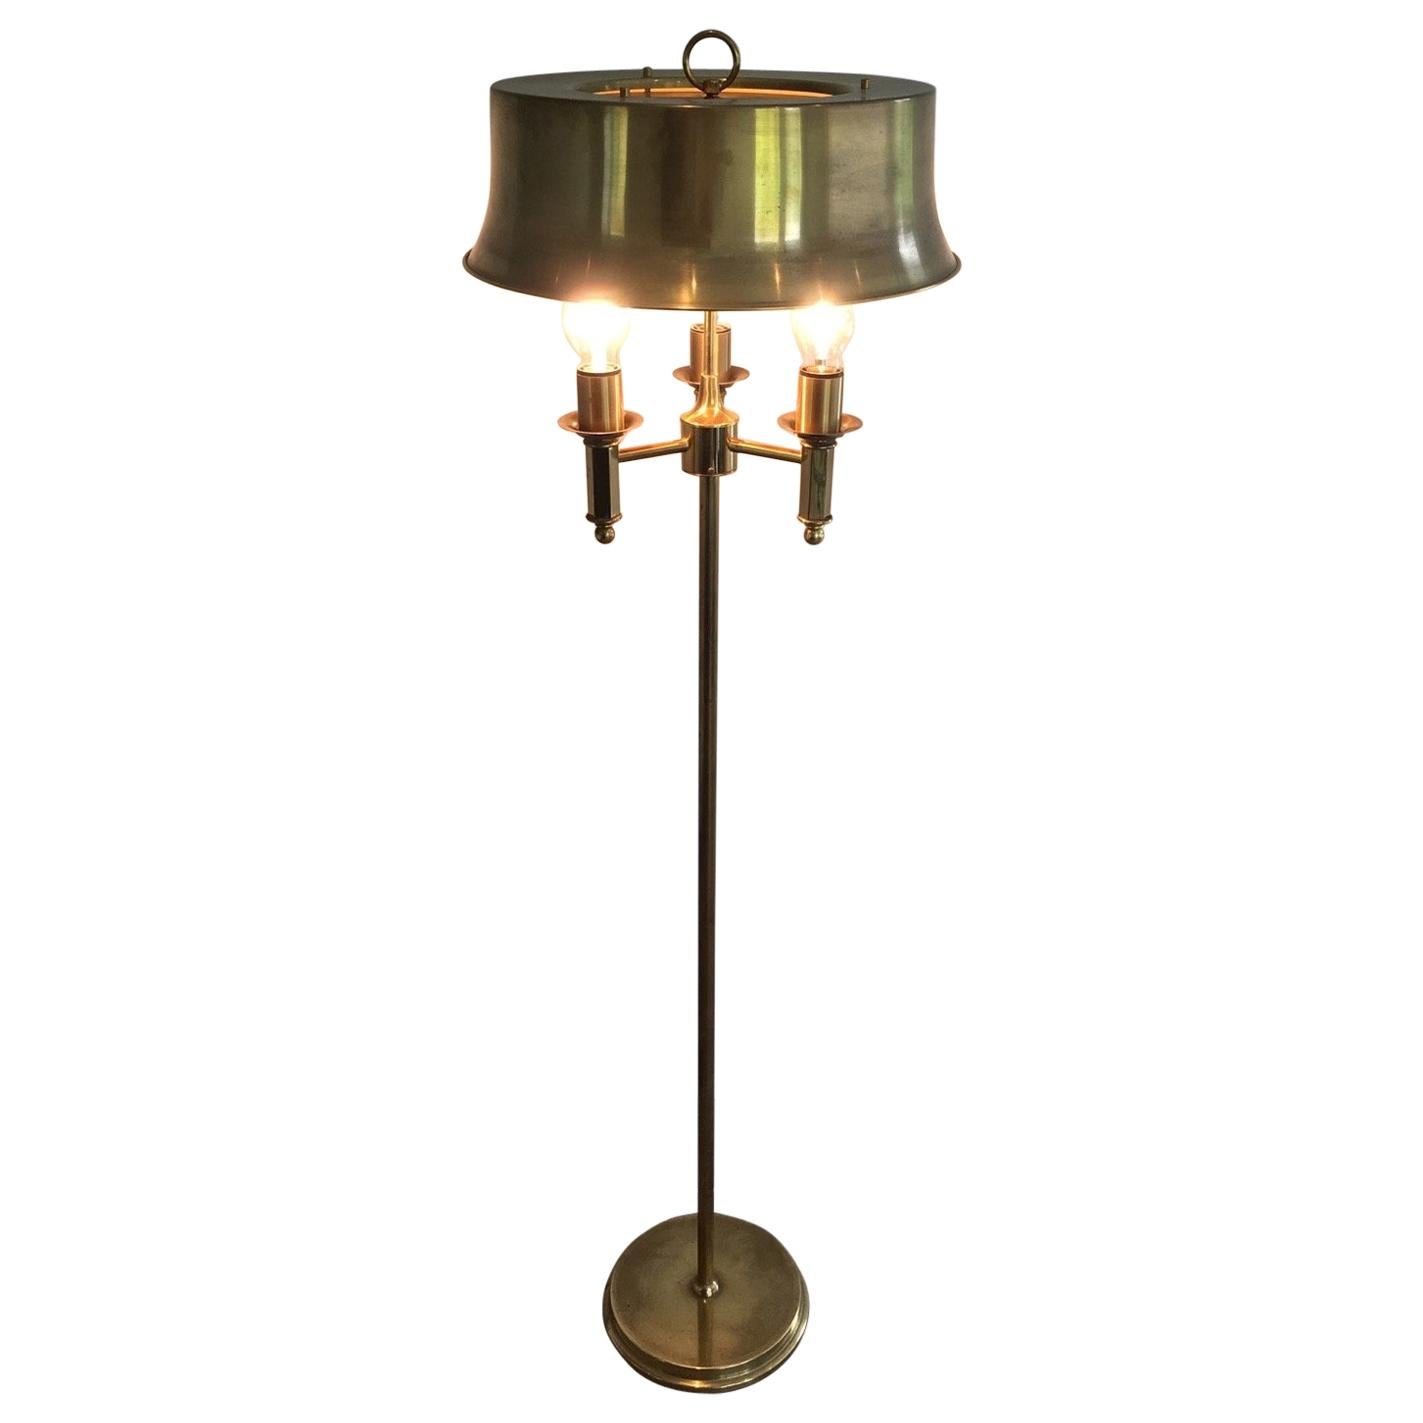 Beautiful Bronze and Brass Floor Lamp with Brass Shade